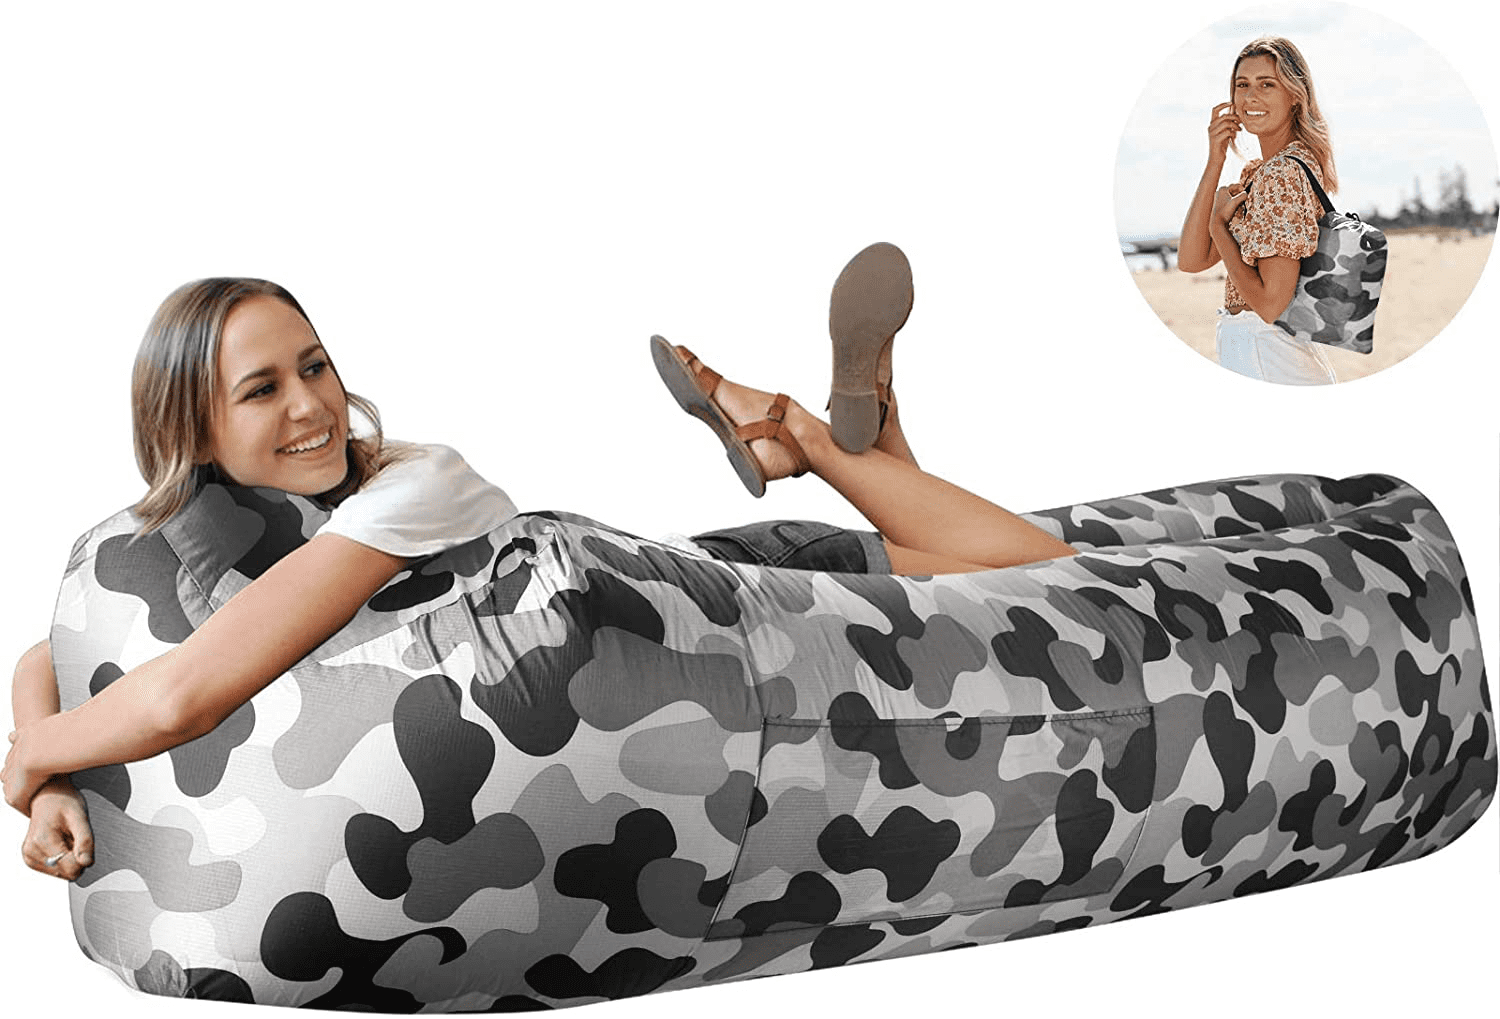 VAC-A-TRIP Inflatable Lounger AirSofa Portable Air Hammock Inflatable Cot for Adults AirChair Inflatable Couch Beach Camping Chair with Carry Bag Securing Stack 3 Pockets and Bottle Opener Sky Blue